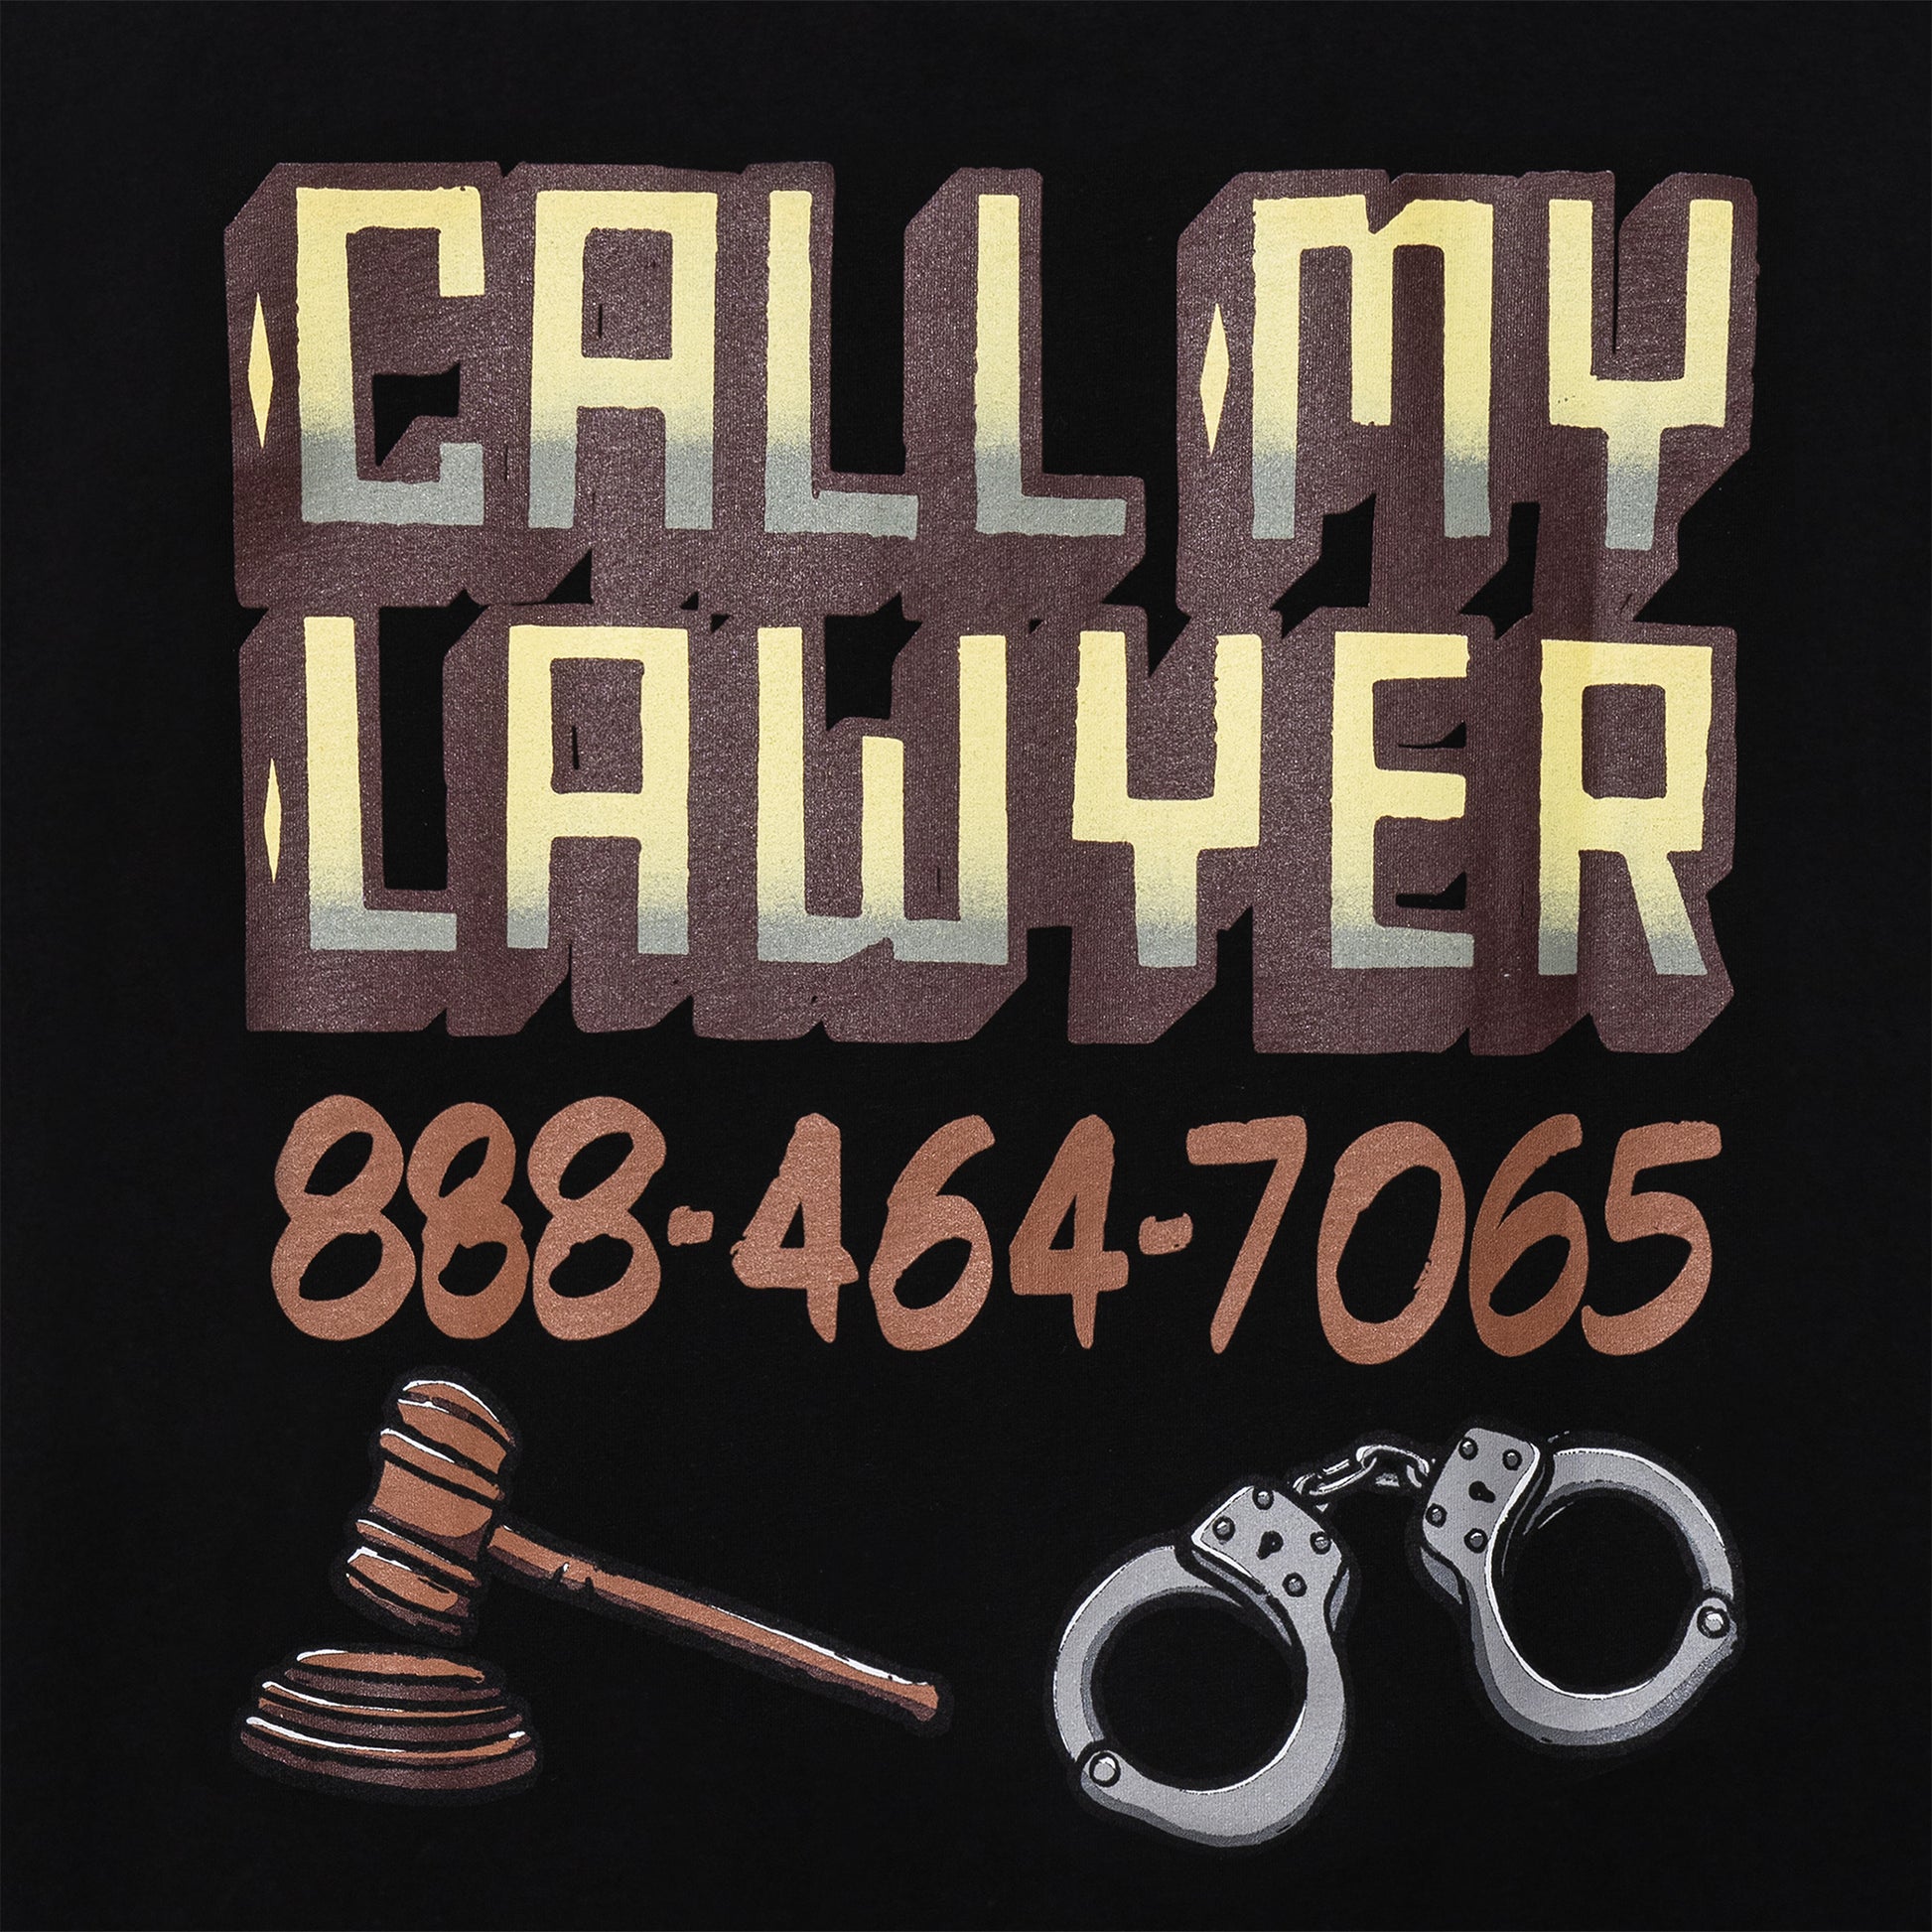 MARKET clothing brand CALL MY LAWYER SIGN T-SHIRT. Find more graphic tees, hats, hoodies and more at MarketStudios.com. Formally Chinatown Market.